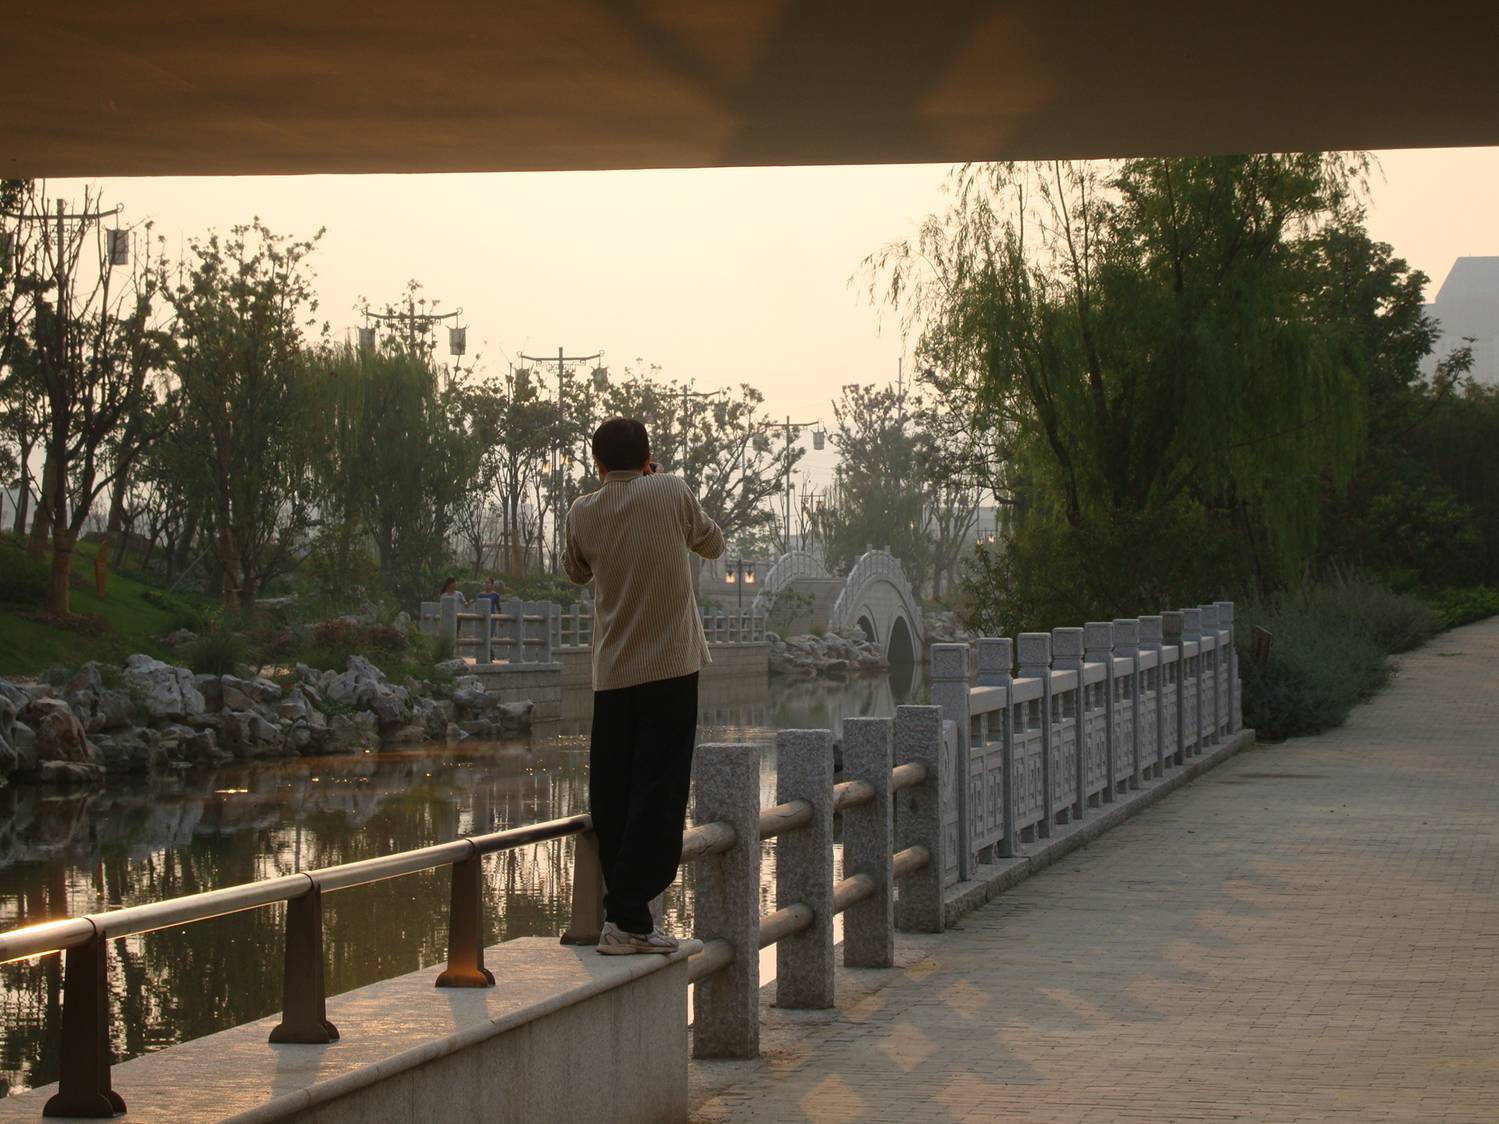 picture: We weren't the only photographers in the park, though nearly the only visitors that day.  Canal side park near Jiangnan University, Wuxi, China